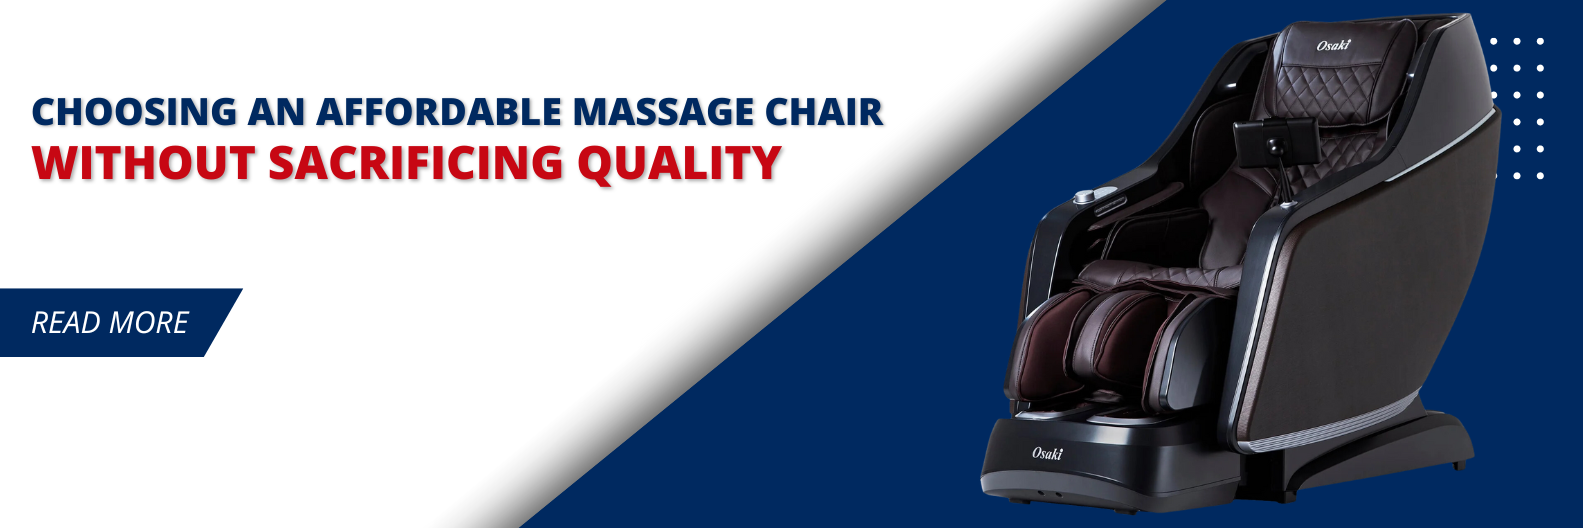 Find the best brands of affordable massage chairs. Discover high-quality, reasonably priced massage chairs for the utmost in at-home comfort.